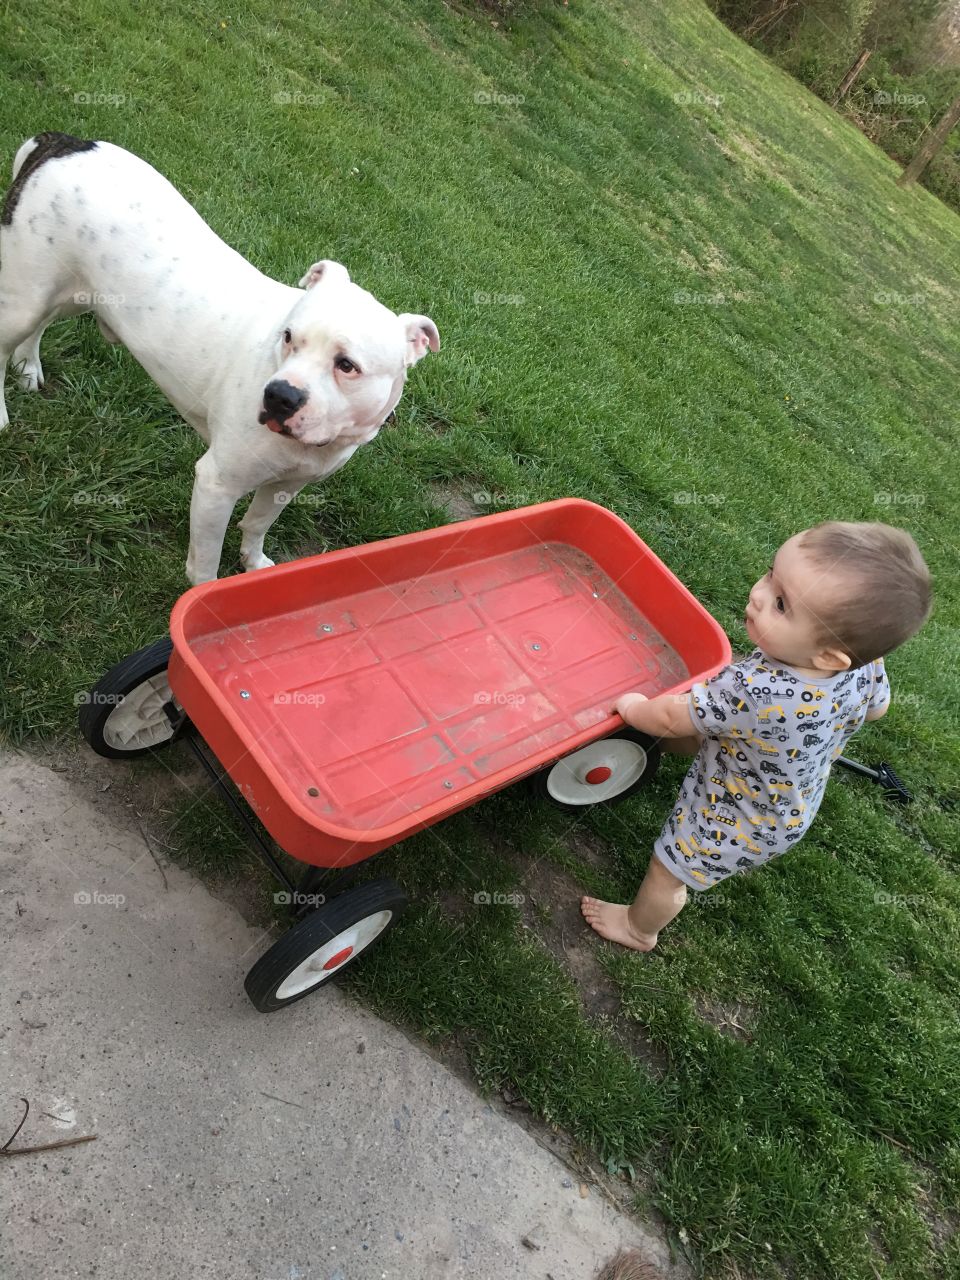 My son and his great uncle’s dog Snoop! They loved playing with each other in the red wagon. 